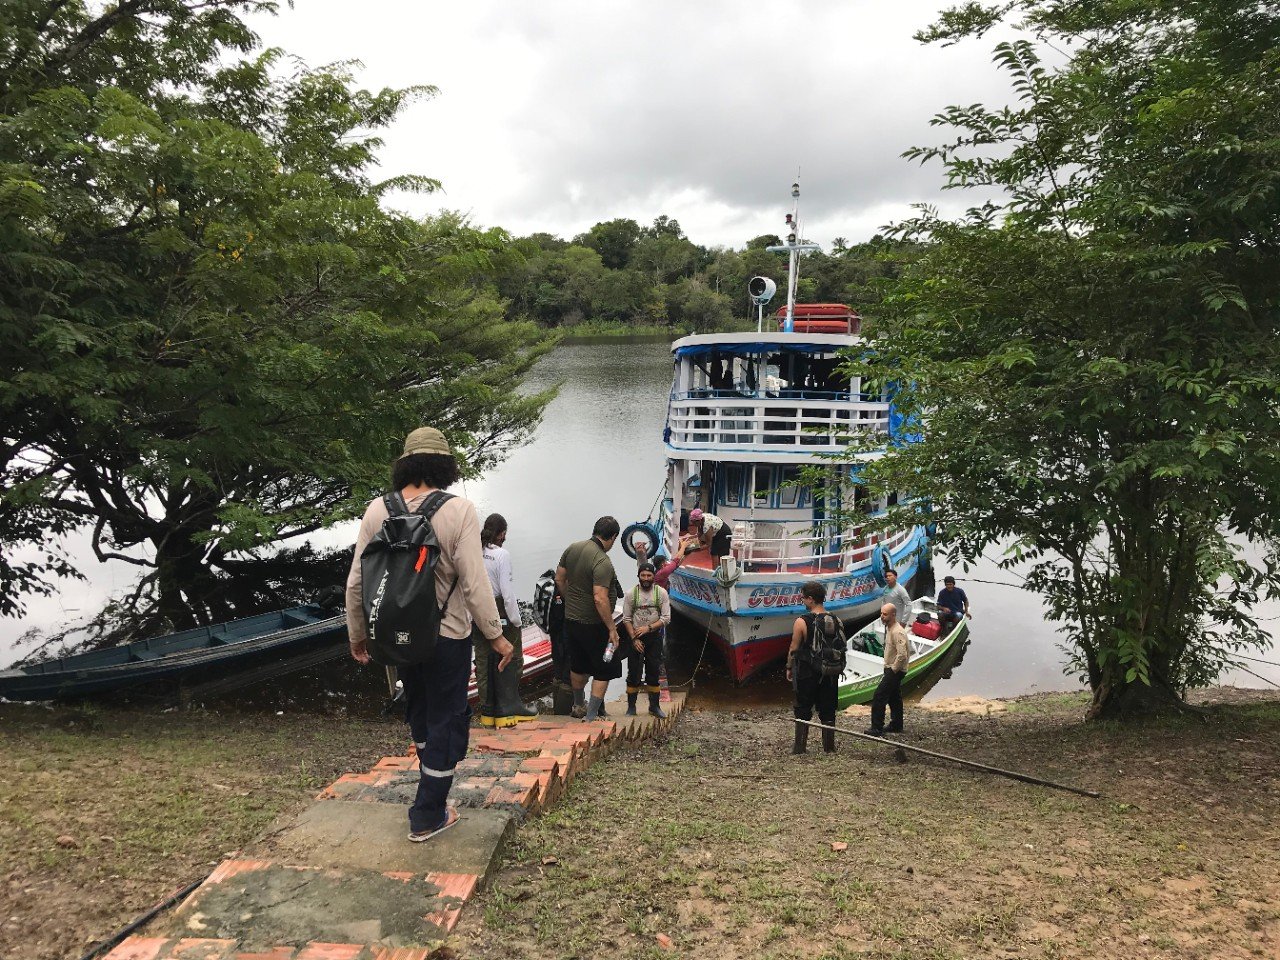 Members of the local Cooperative CoopXixuau board a boat on the Rio Branco Jauaperi, their only means of transport through the Amazon rainforest to transport food and other supplies.